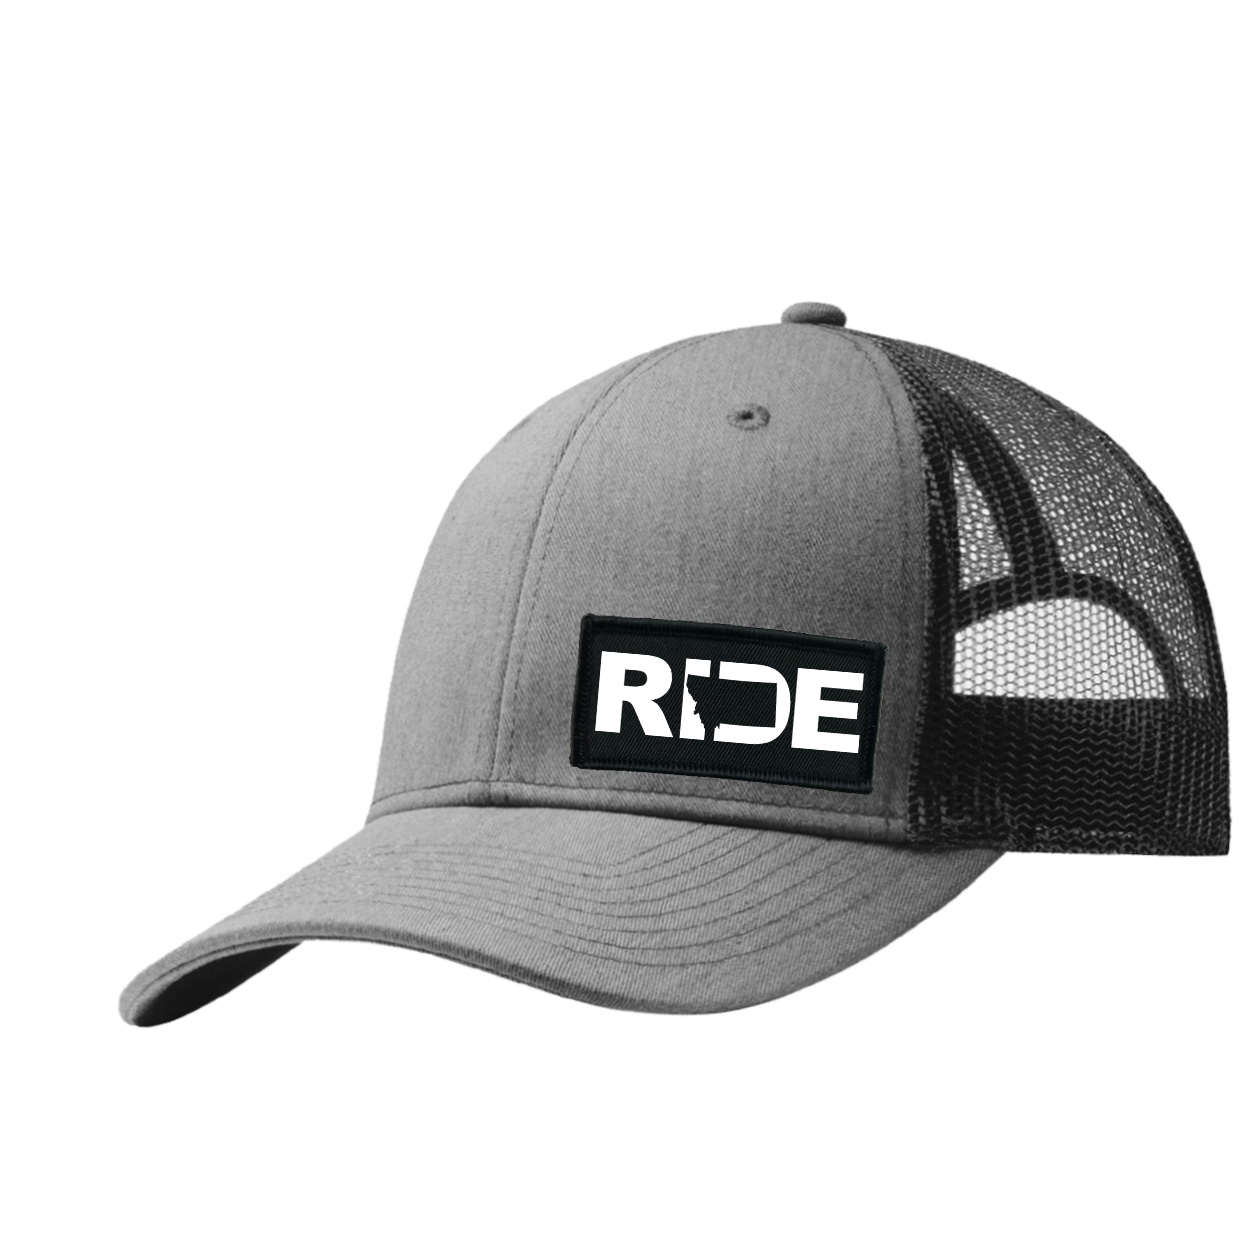 Ride Montana Night Out Woven Patch Snapback Trucker Hat Heather Gray/Black (White Logo)